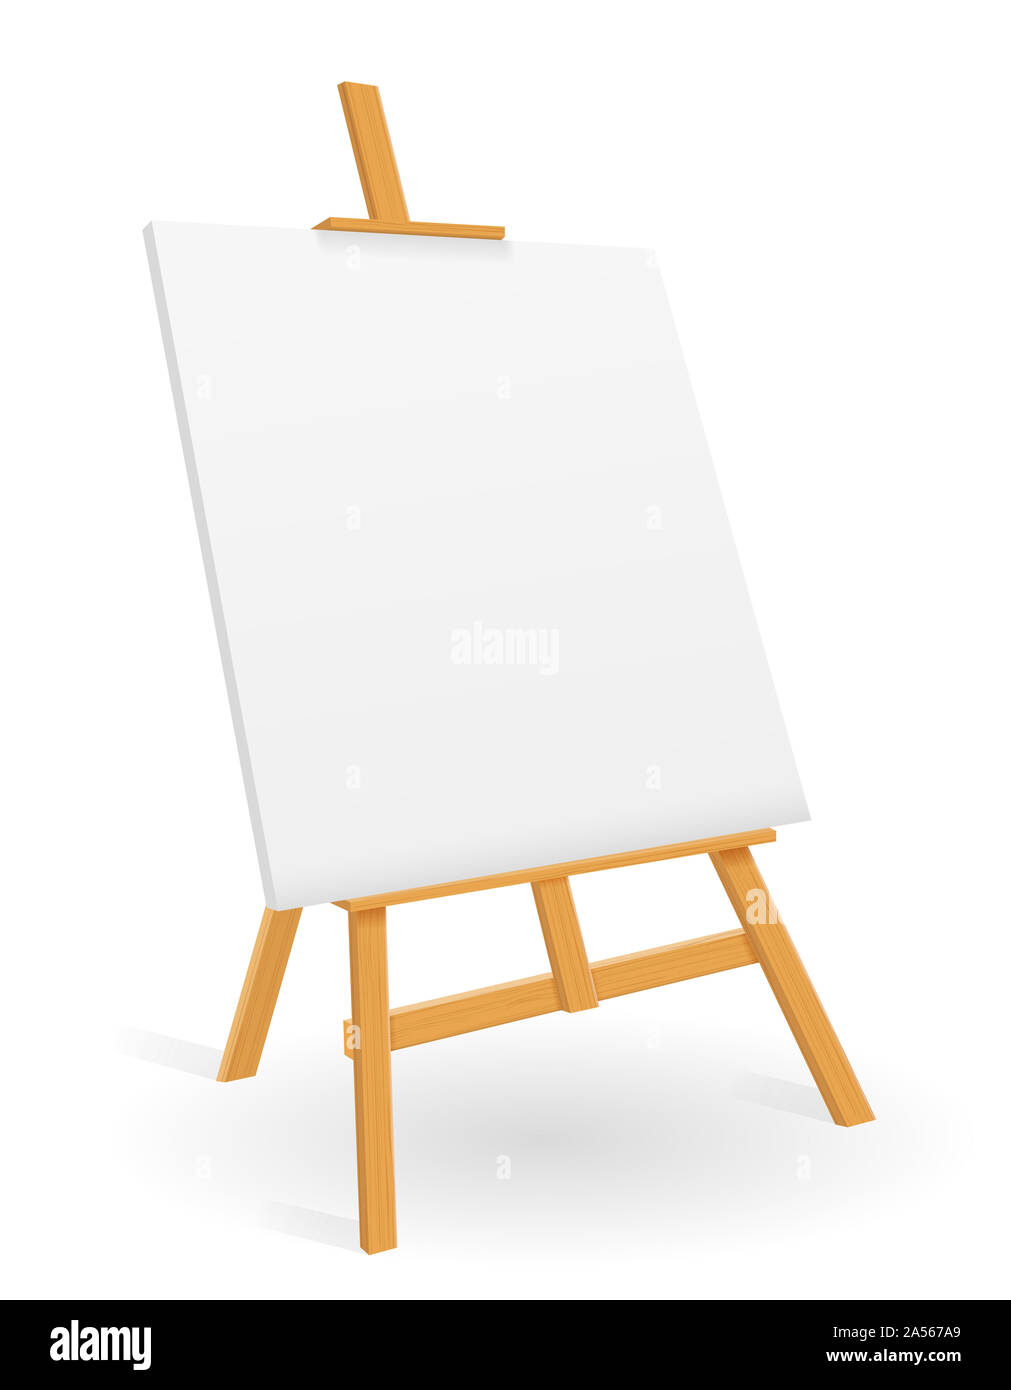 Easel with drawing colorful sketch canvas Vector Image